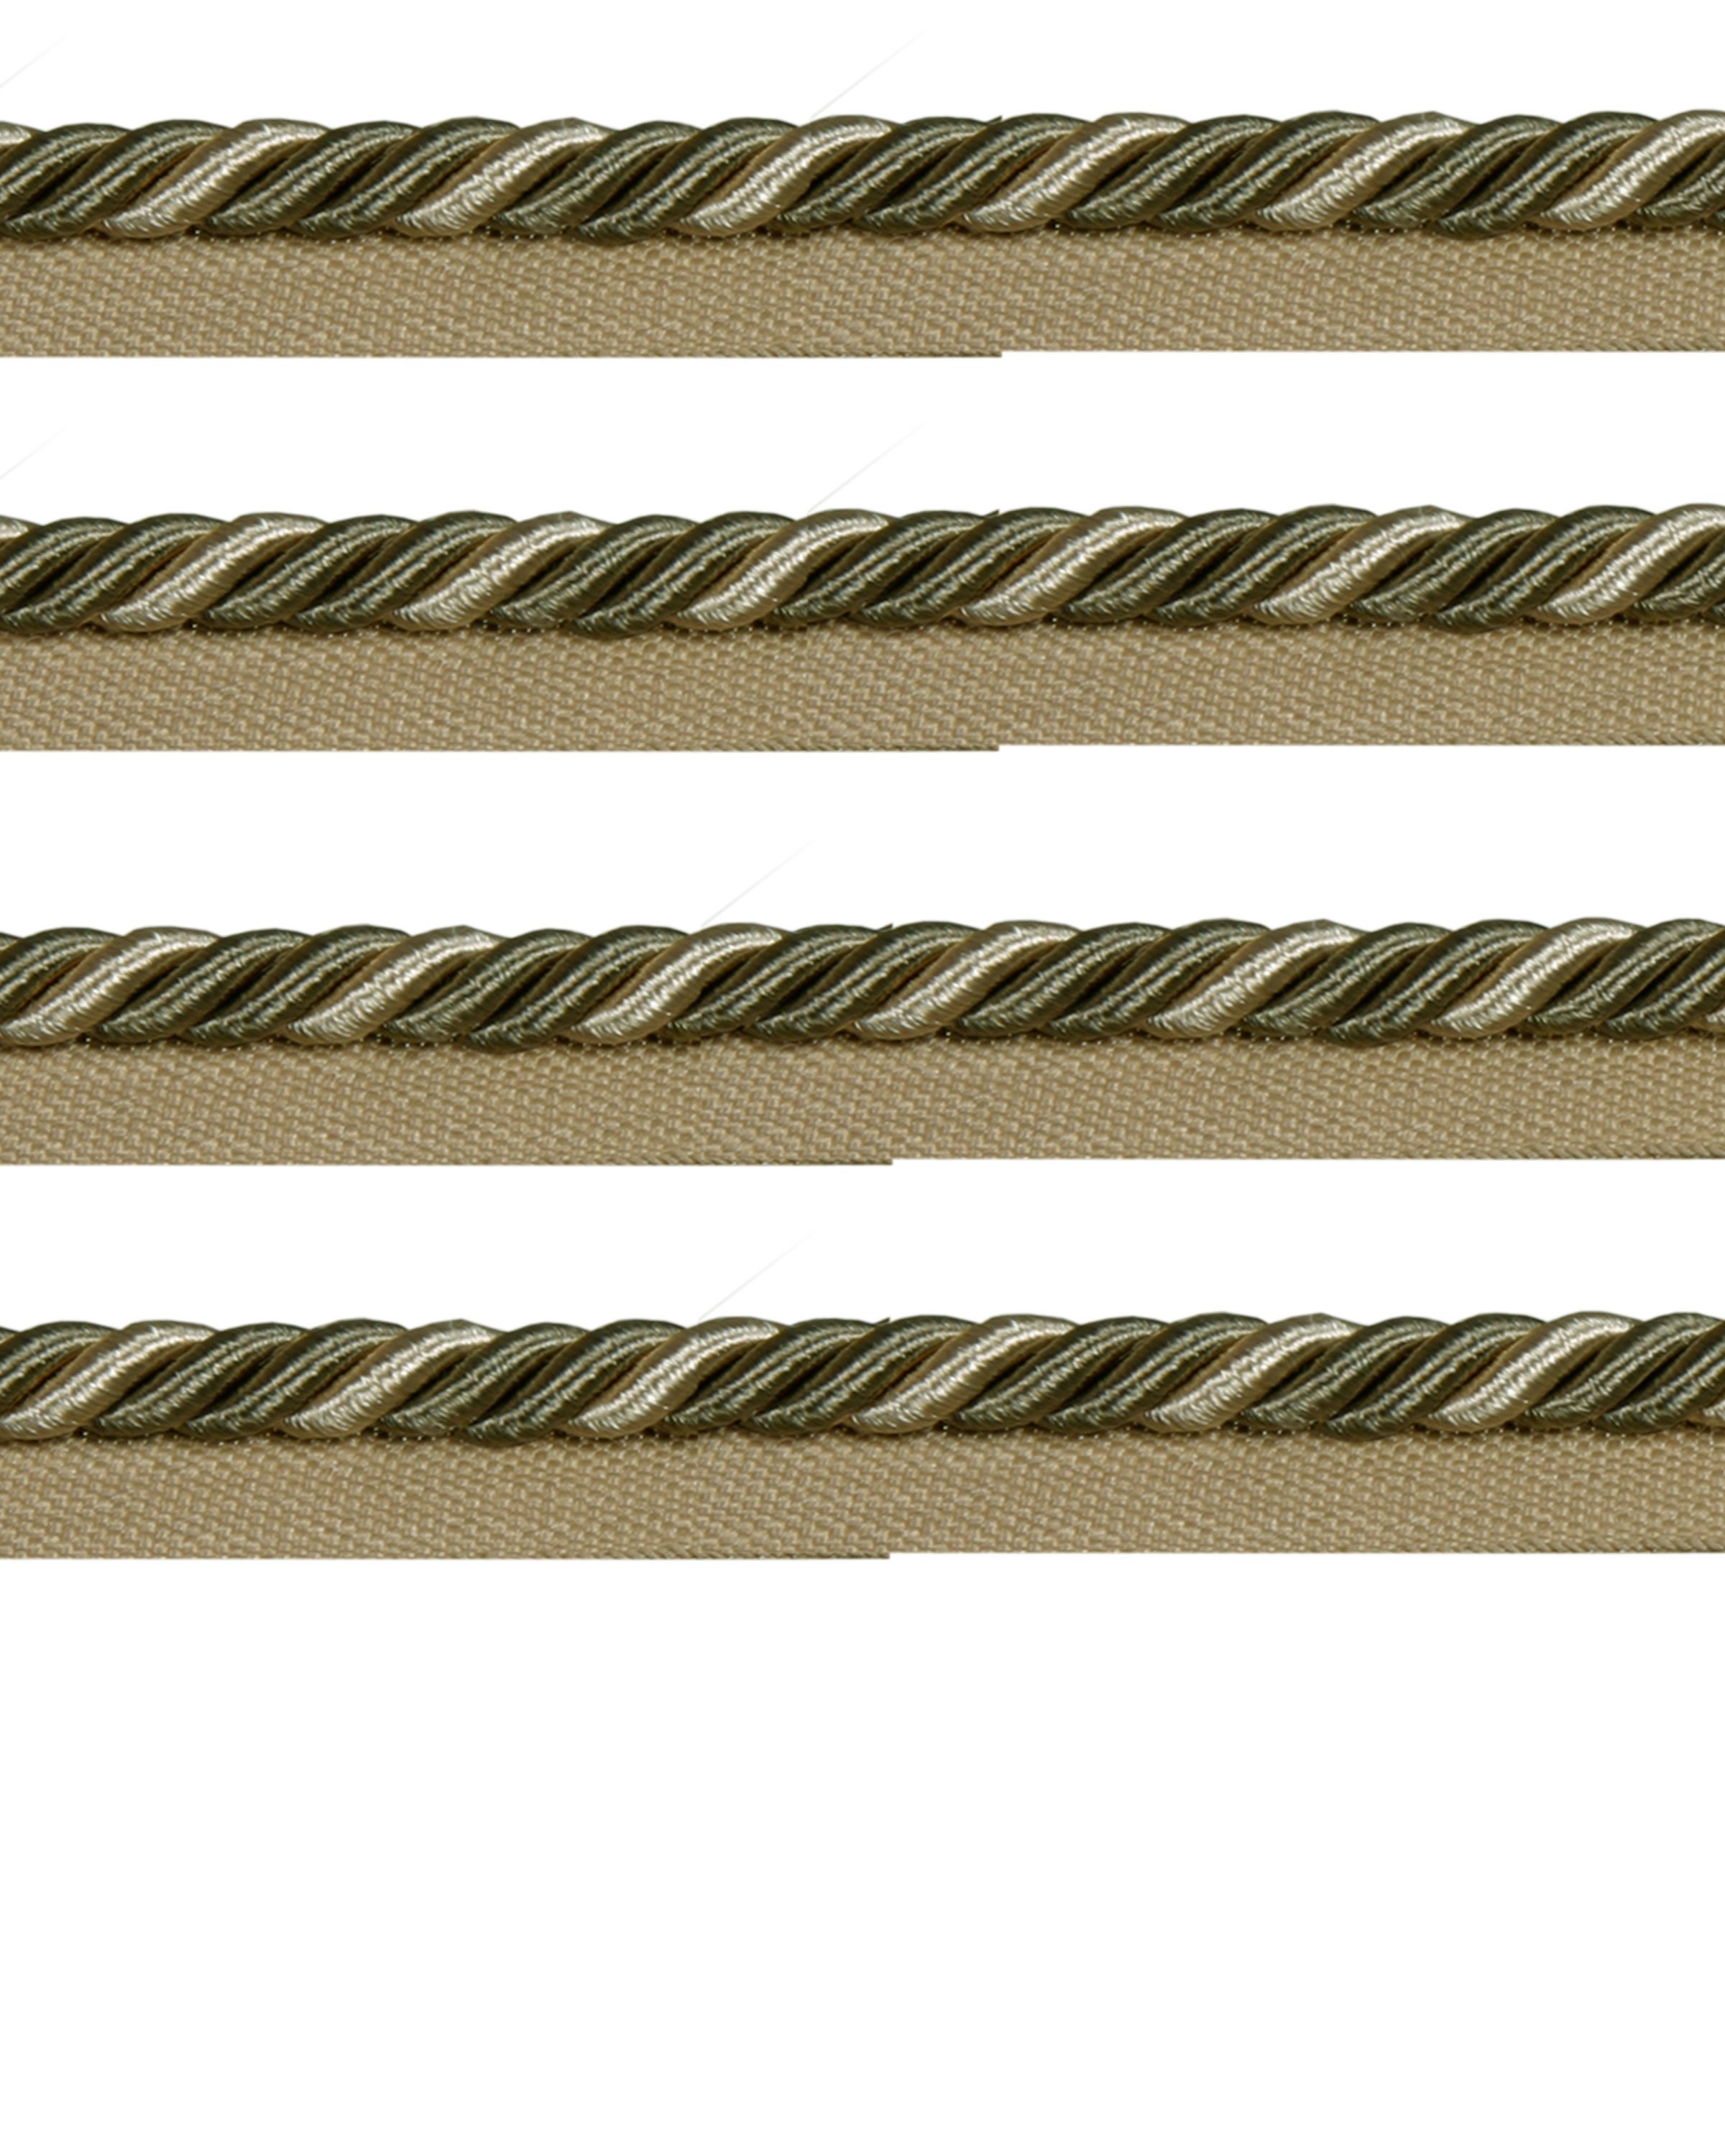 Piping Cord on Tape 8mm- Olive Green Price is for 5 metres